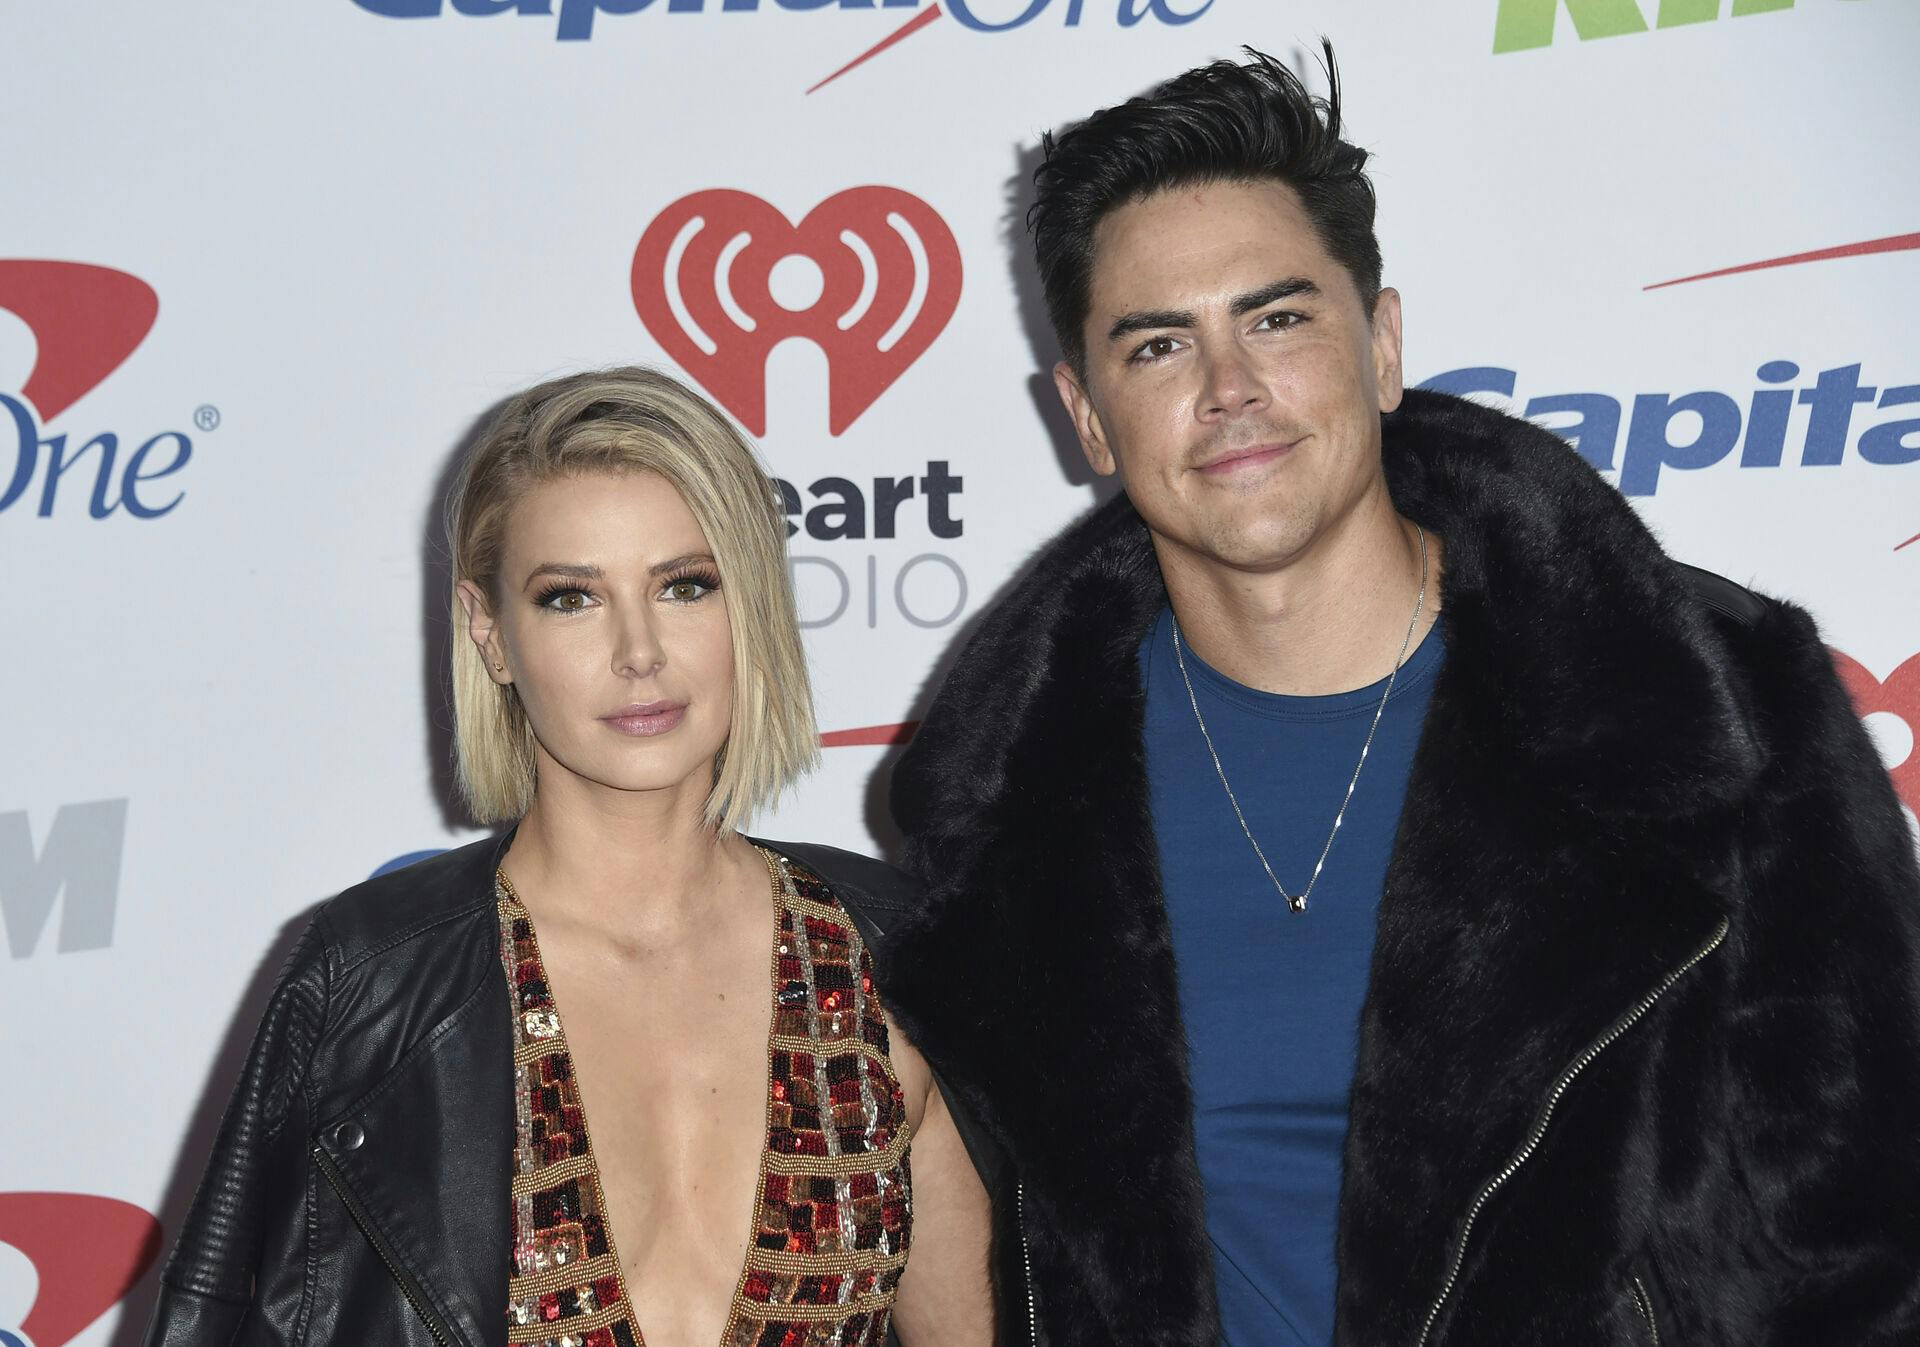 Ariana Madix, left, and Tom Sandoval arrive at Jingle Ball at The Forum on Friday, Dec. 1, 2017, in Inglewood, Calif. (Photo by Richard Shotwell/Invision/AP)